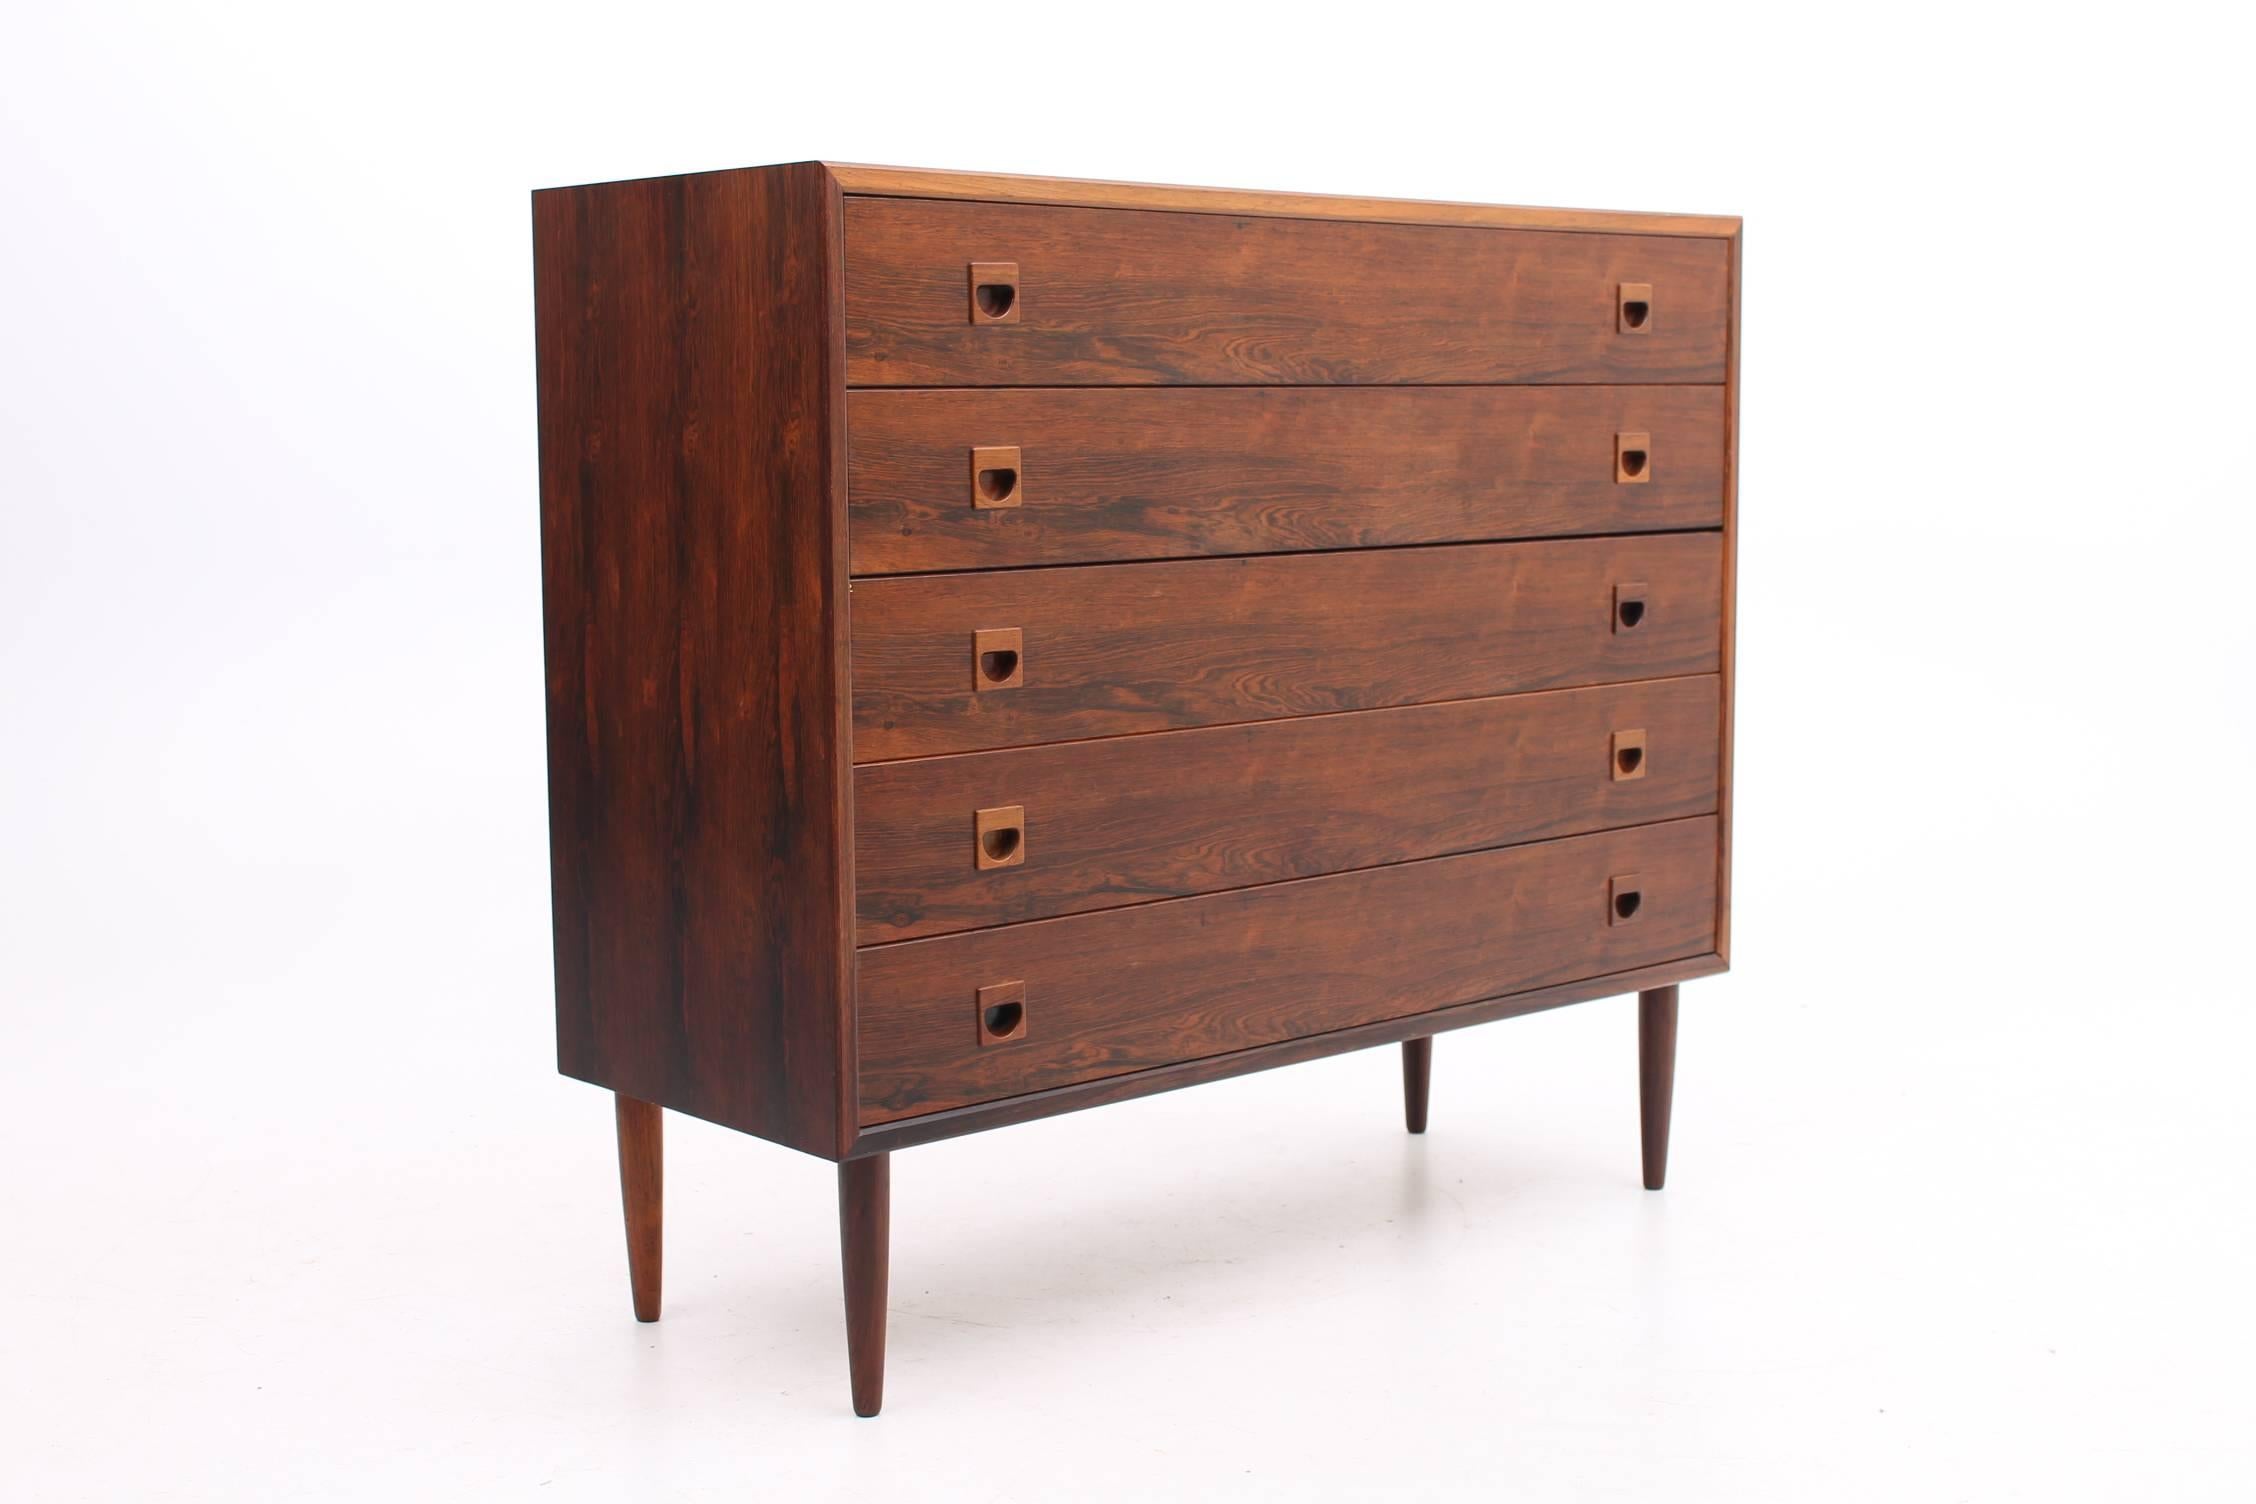 Large chest of drawers designed by Brouer Møbelfabrik. This large size chest features five roomy drawers with handmade drawer pulls. The rosewood has been restored and is in excellent condition.